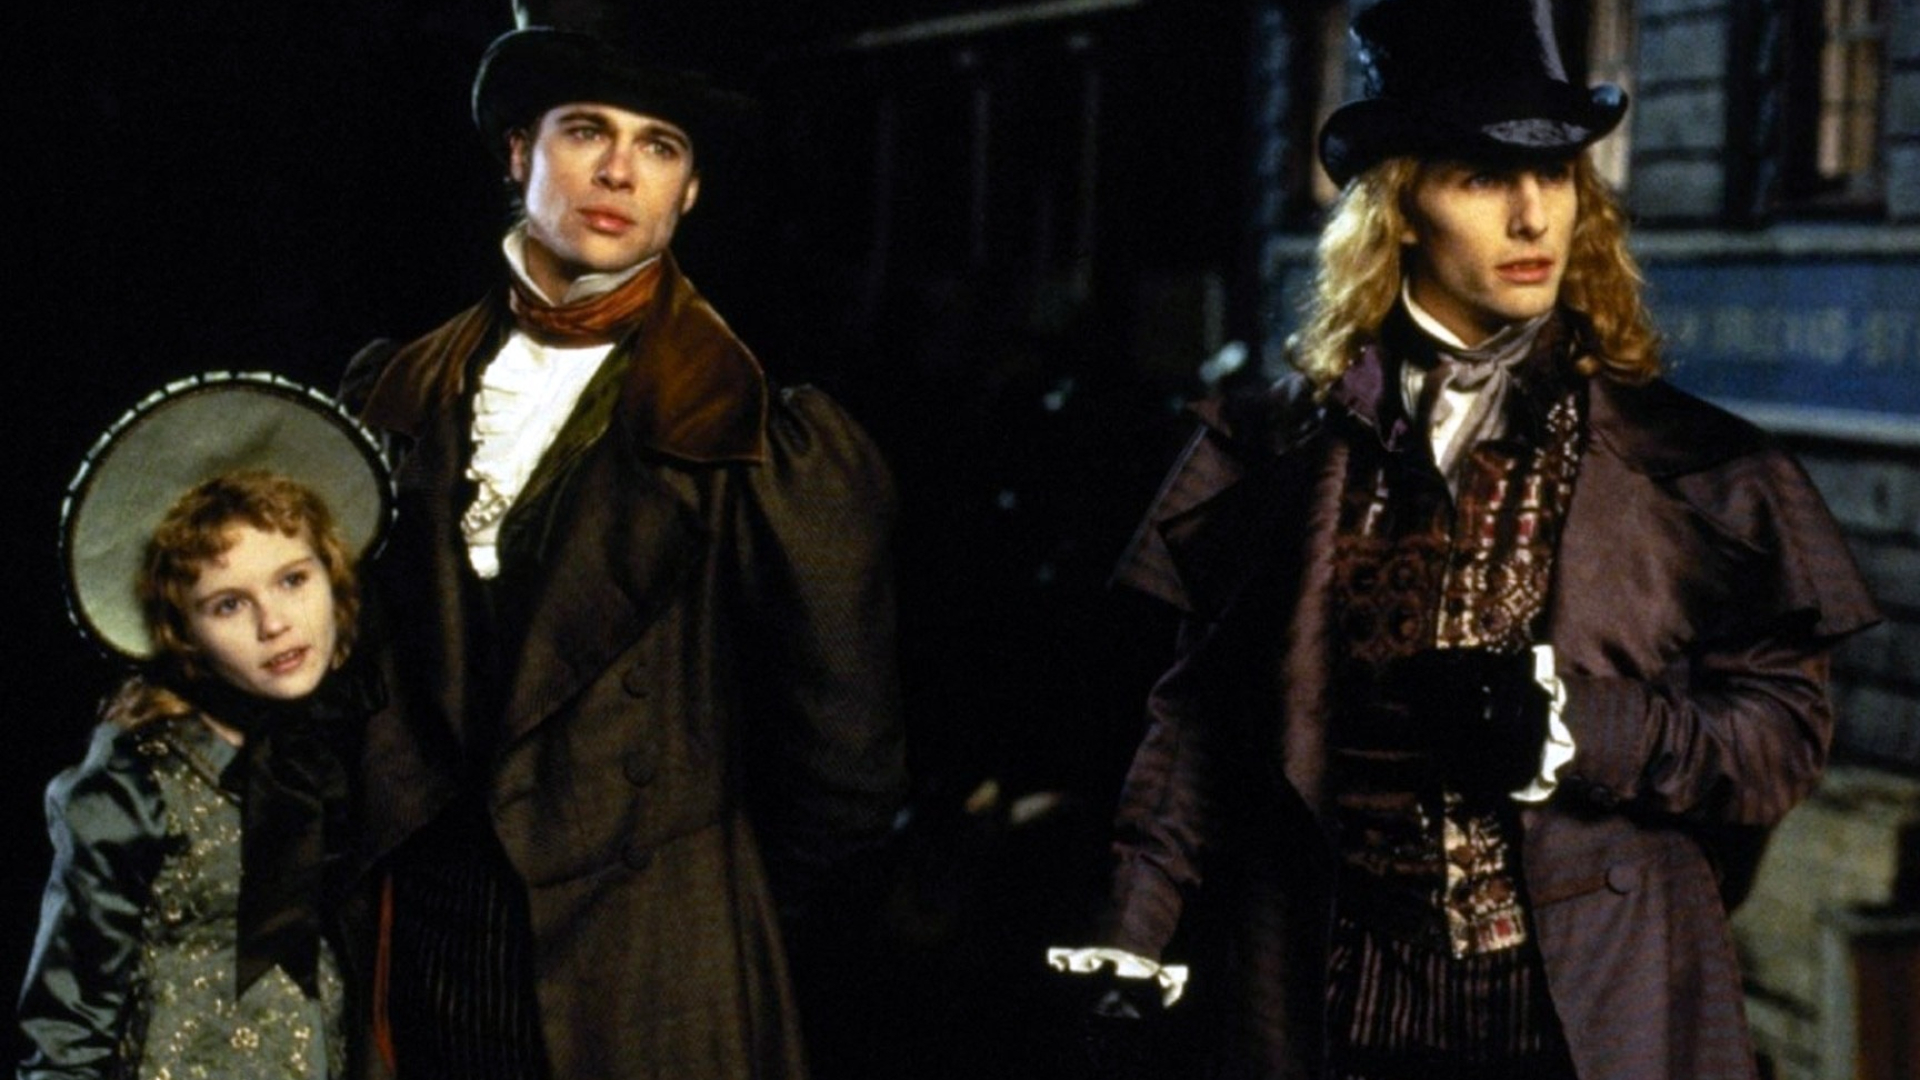 Interview with the Vampire: Kirsten Dunst, Tom Cruise, and Brad Pit, 1994 movie. 1920x1080 Full HD Wallpaper.